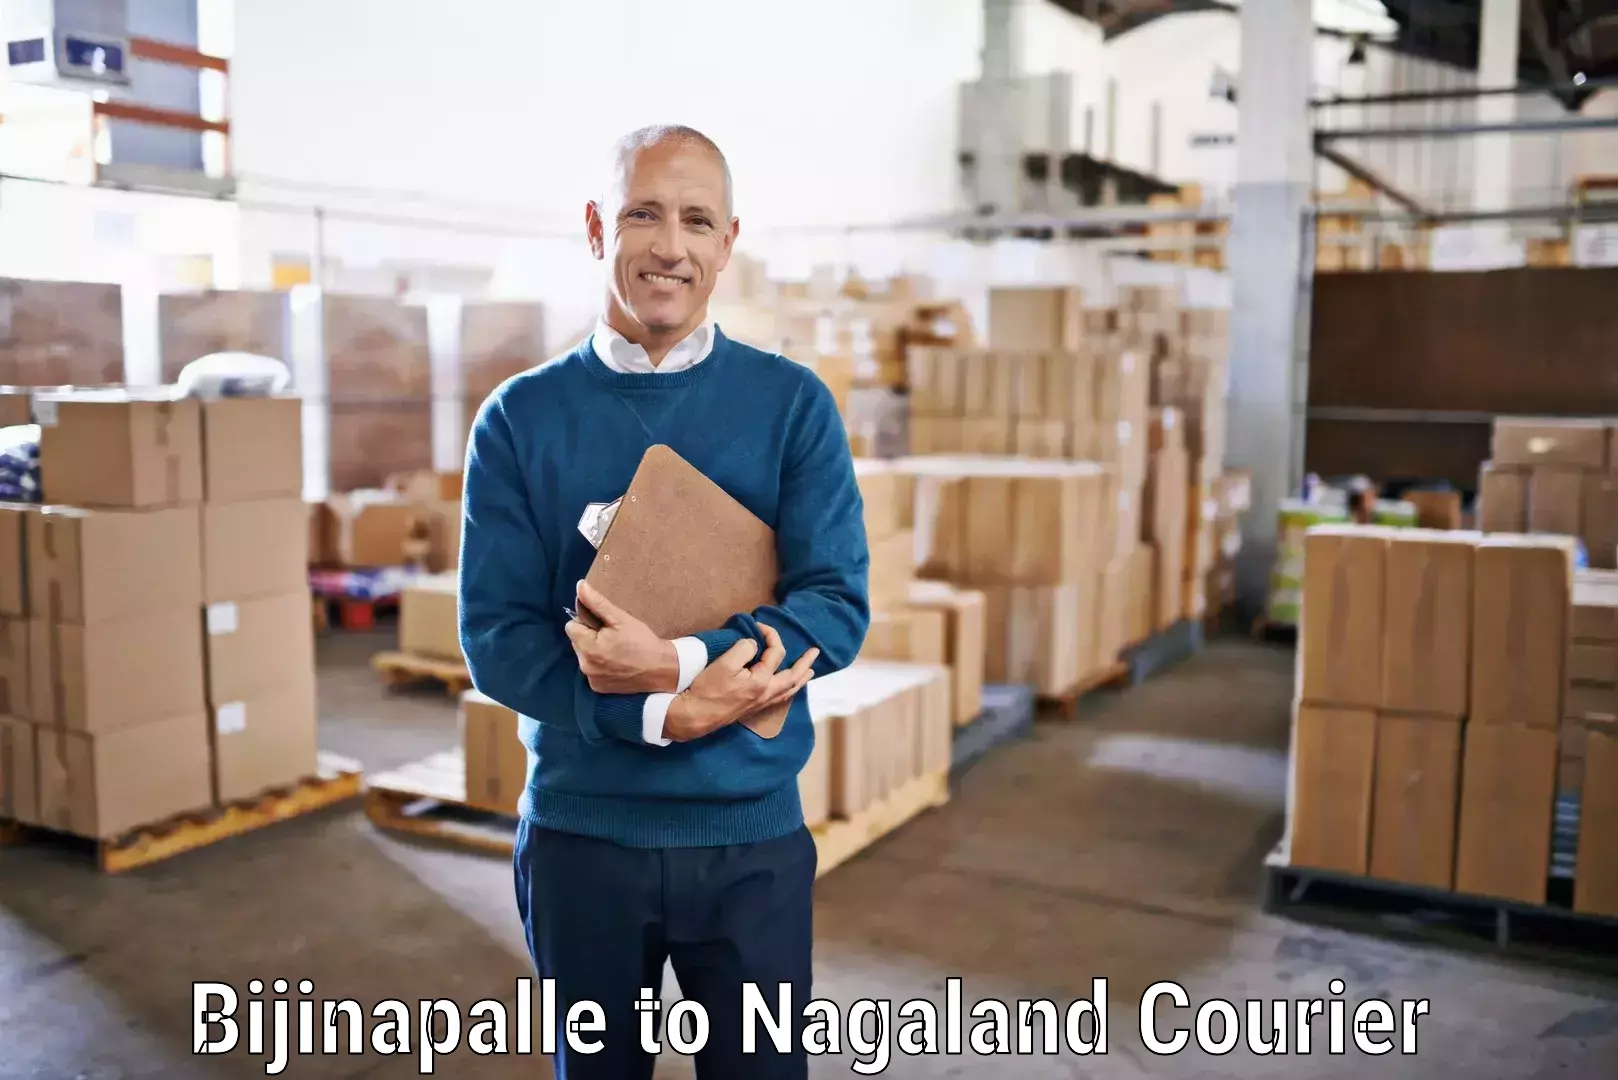 Special handling courier Bijinapalle to Nagaland